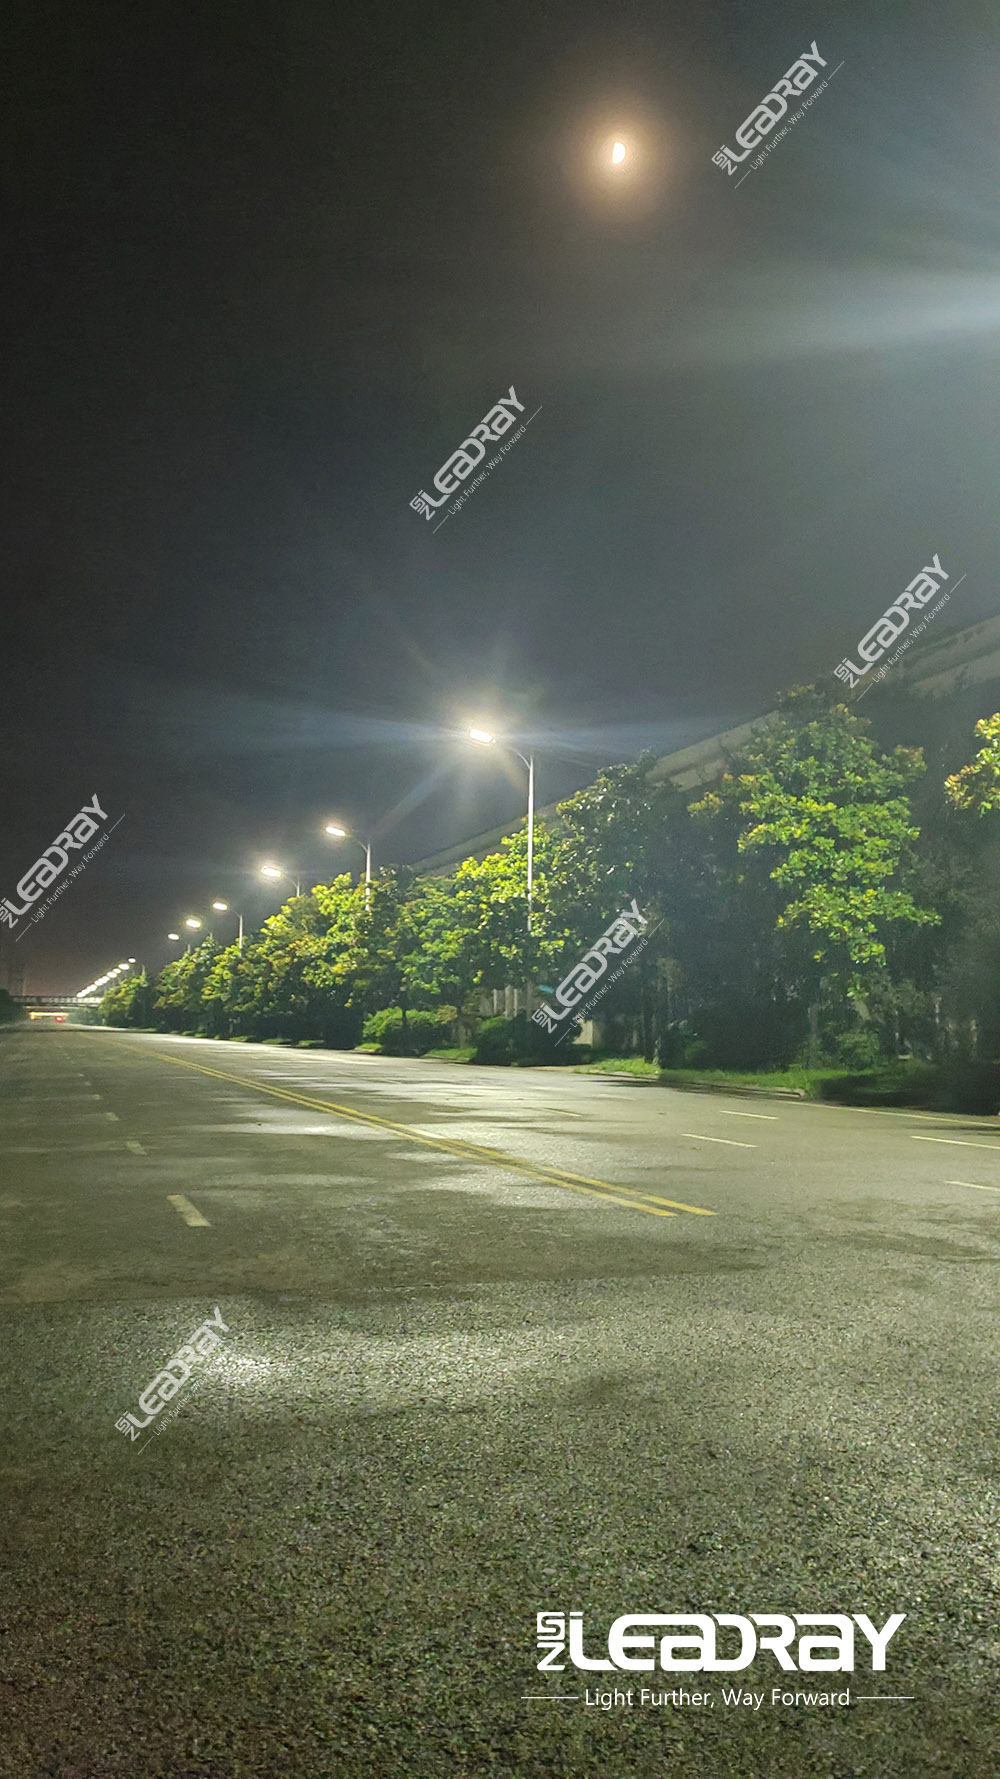 solar streetlights do not require tedious wire laying